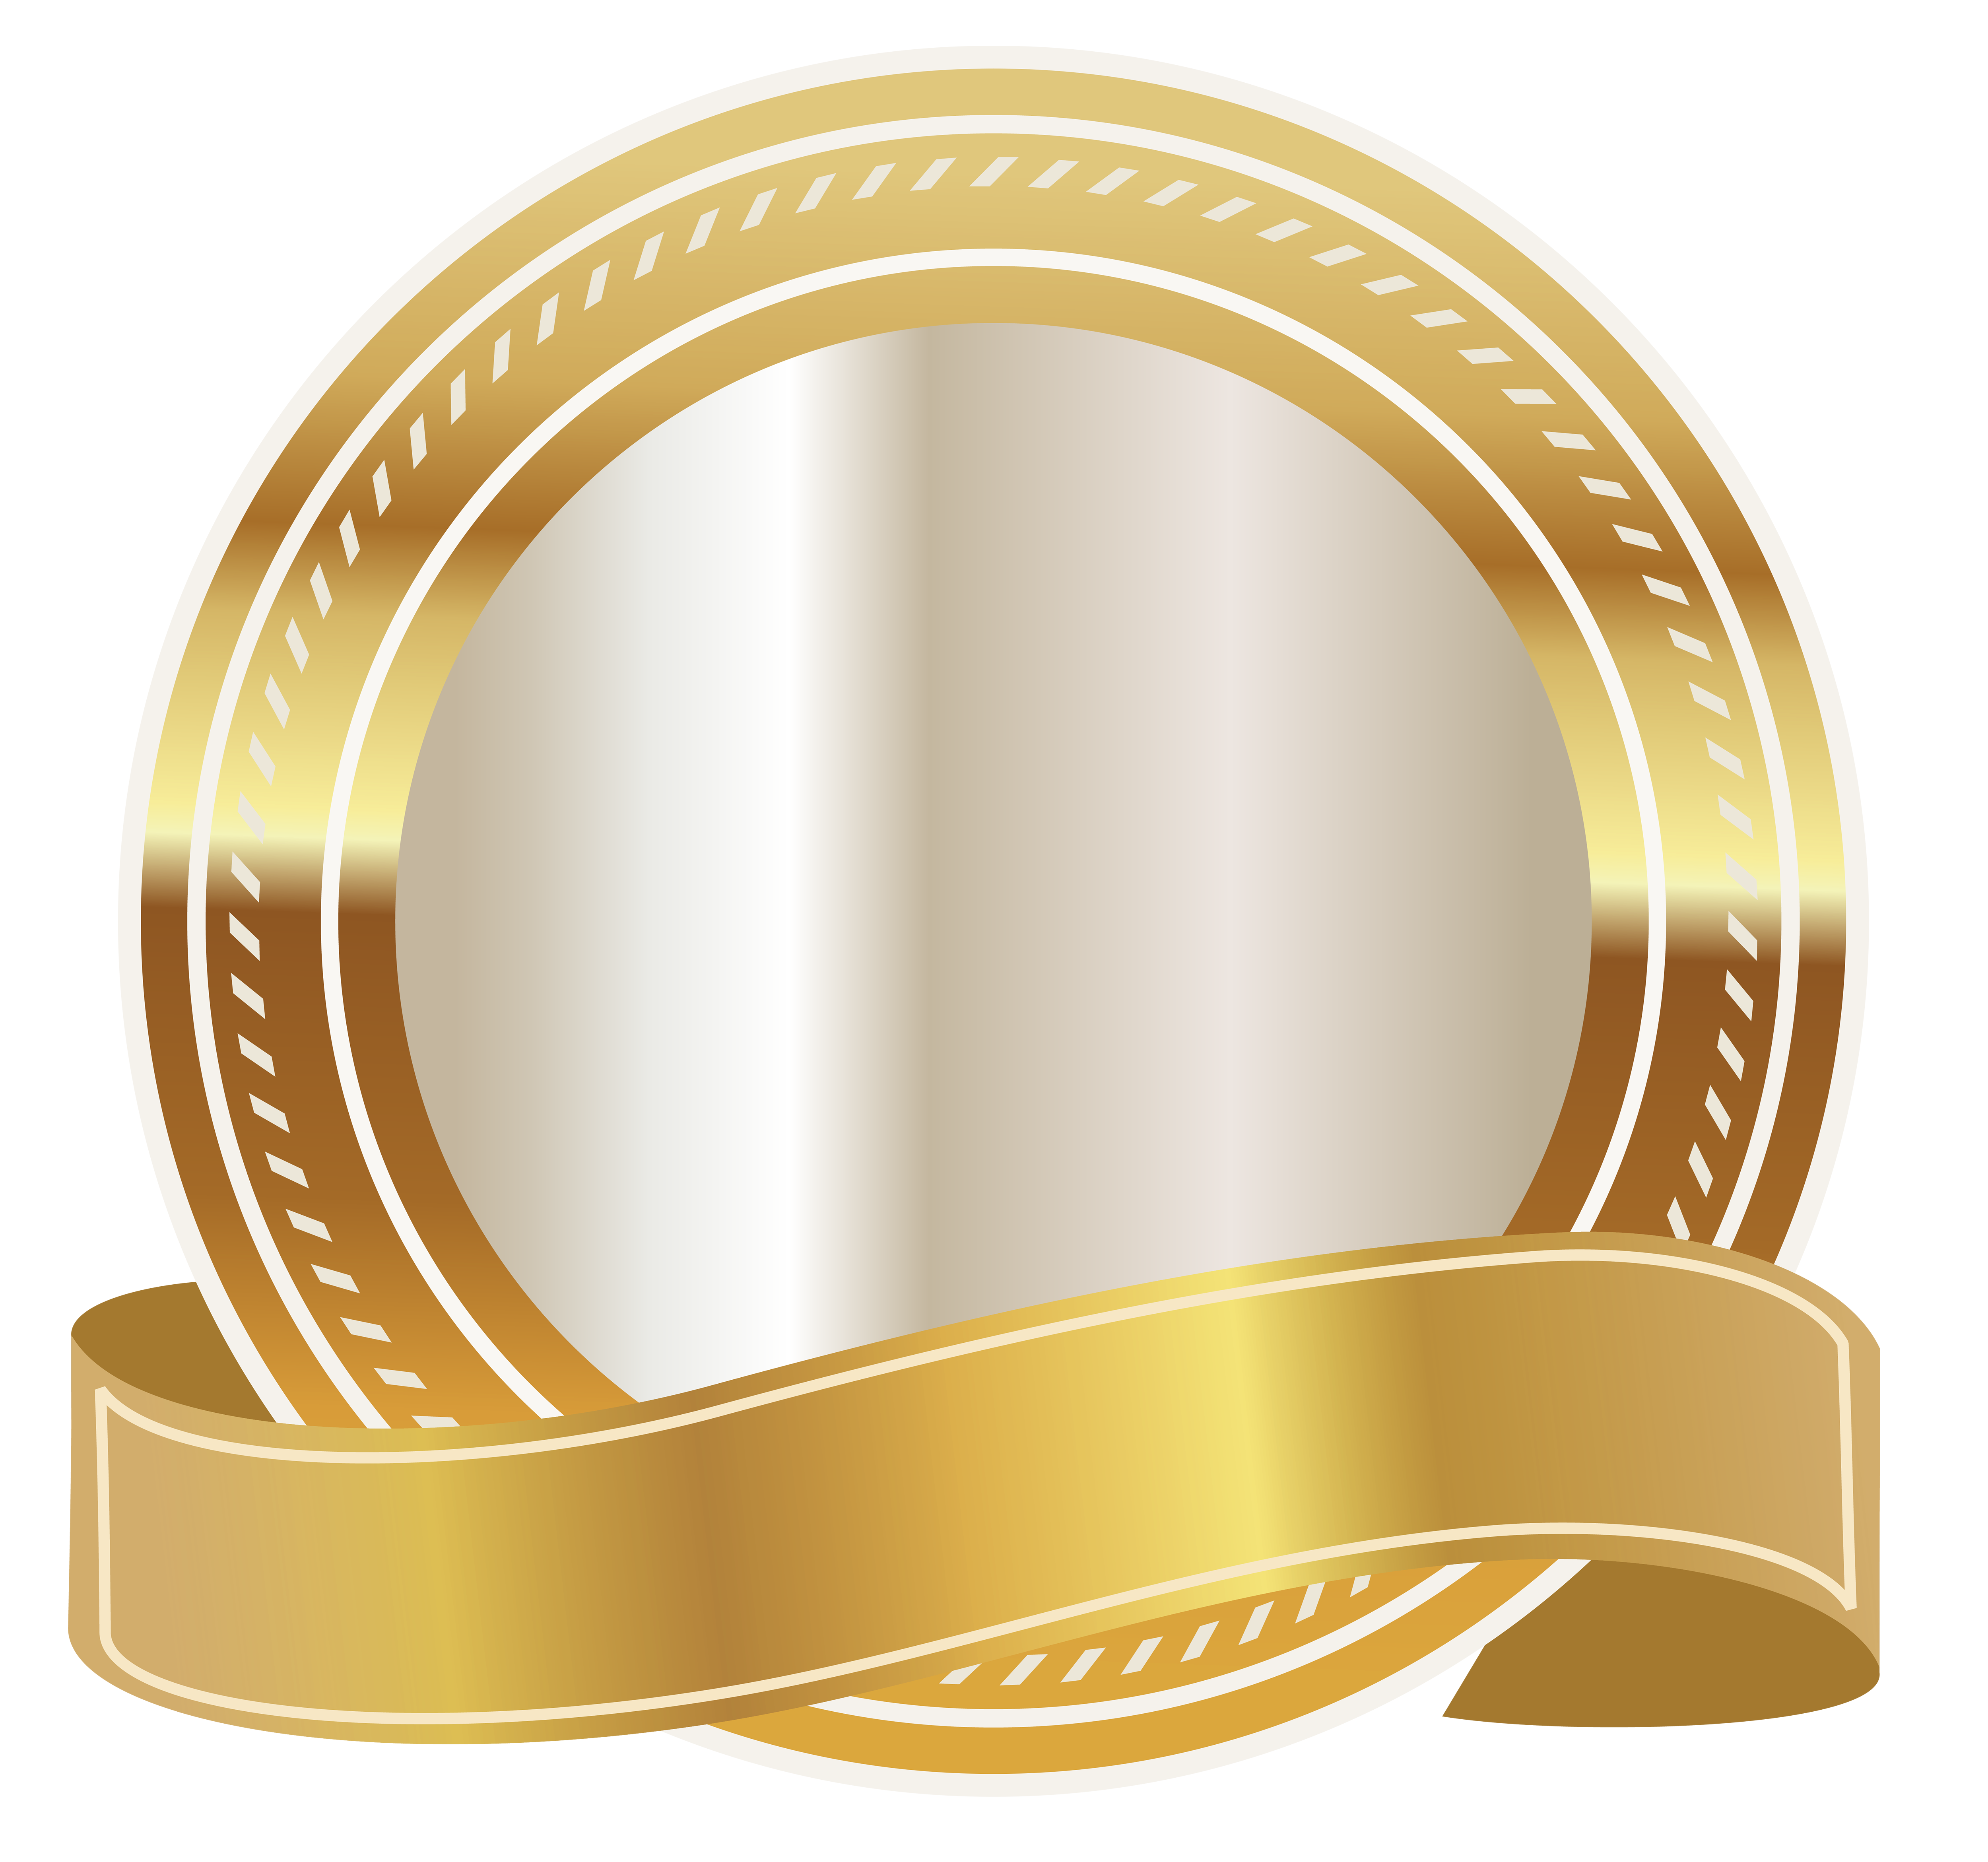 Good clipart medal certificate. Gold seal with ribbon